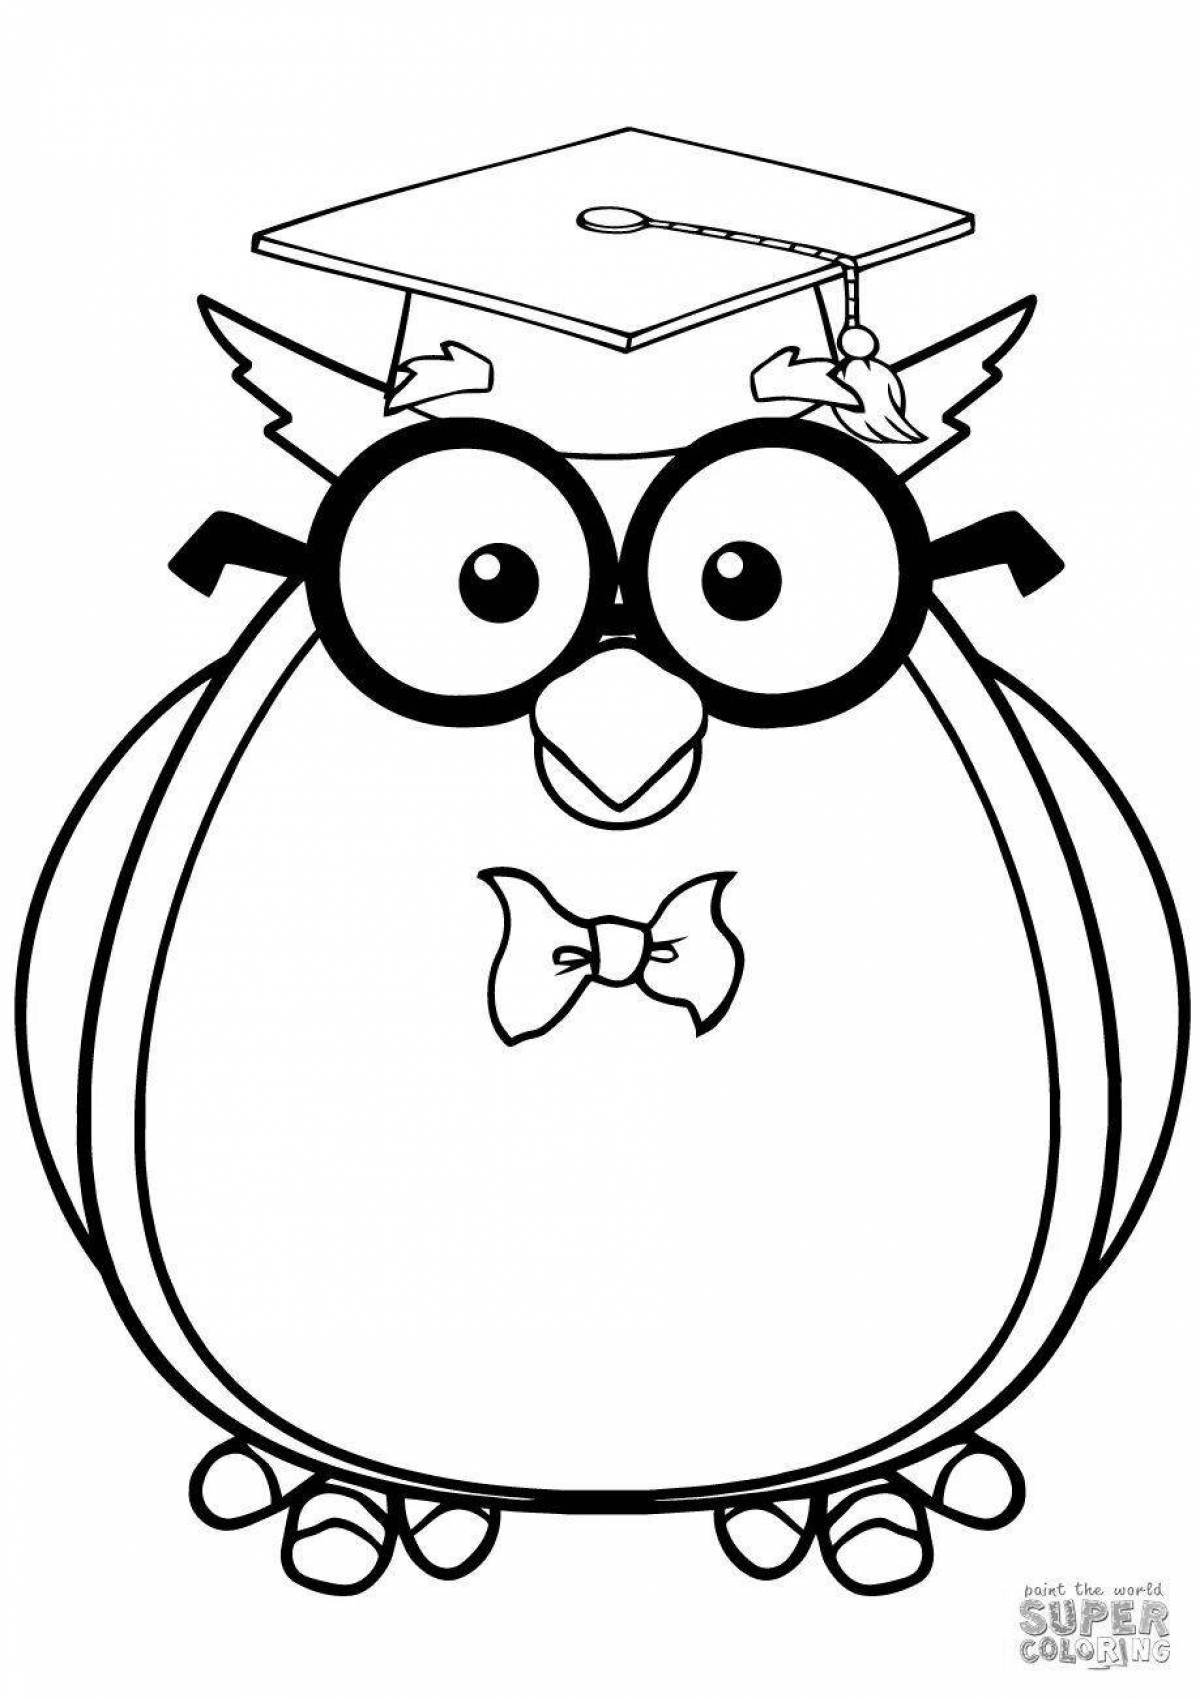 Wise owl coloring book with telescope